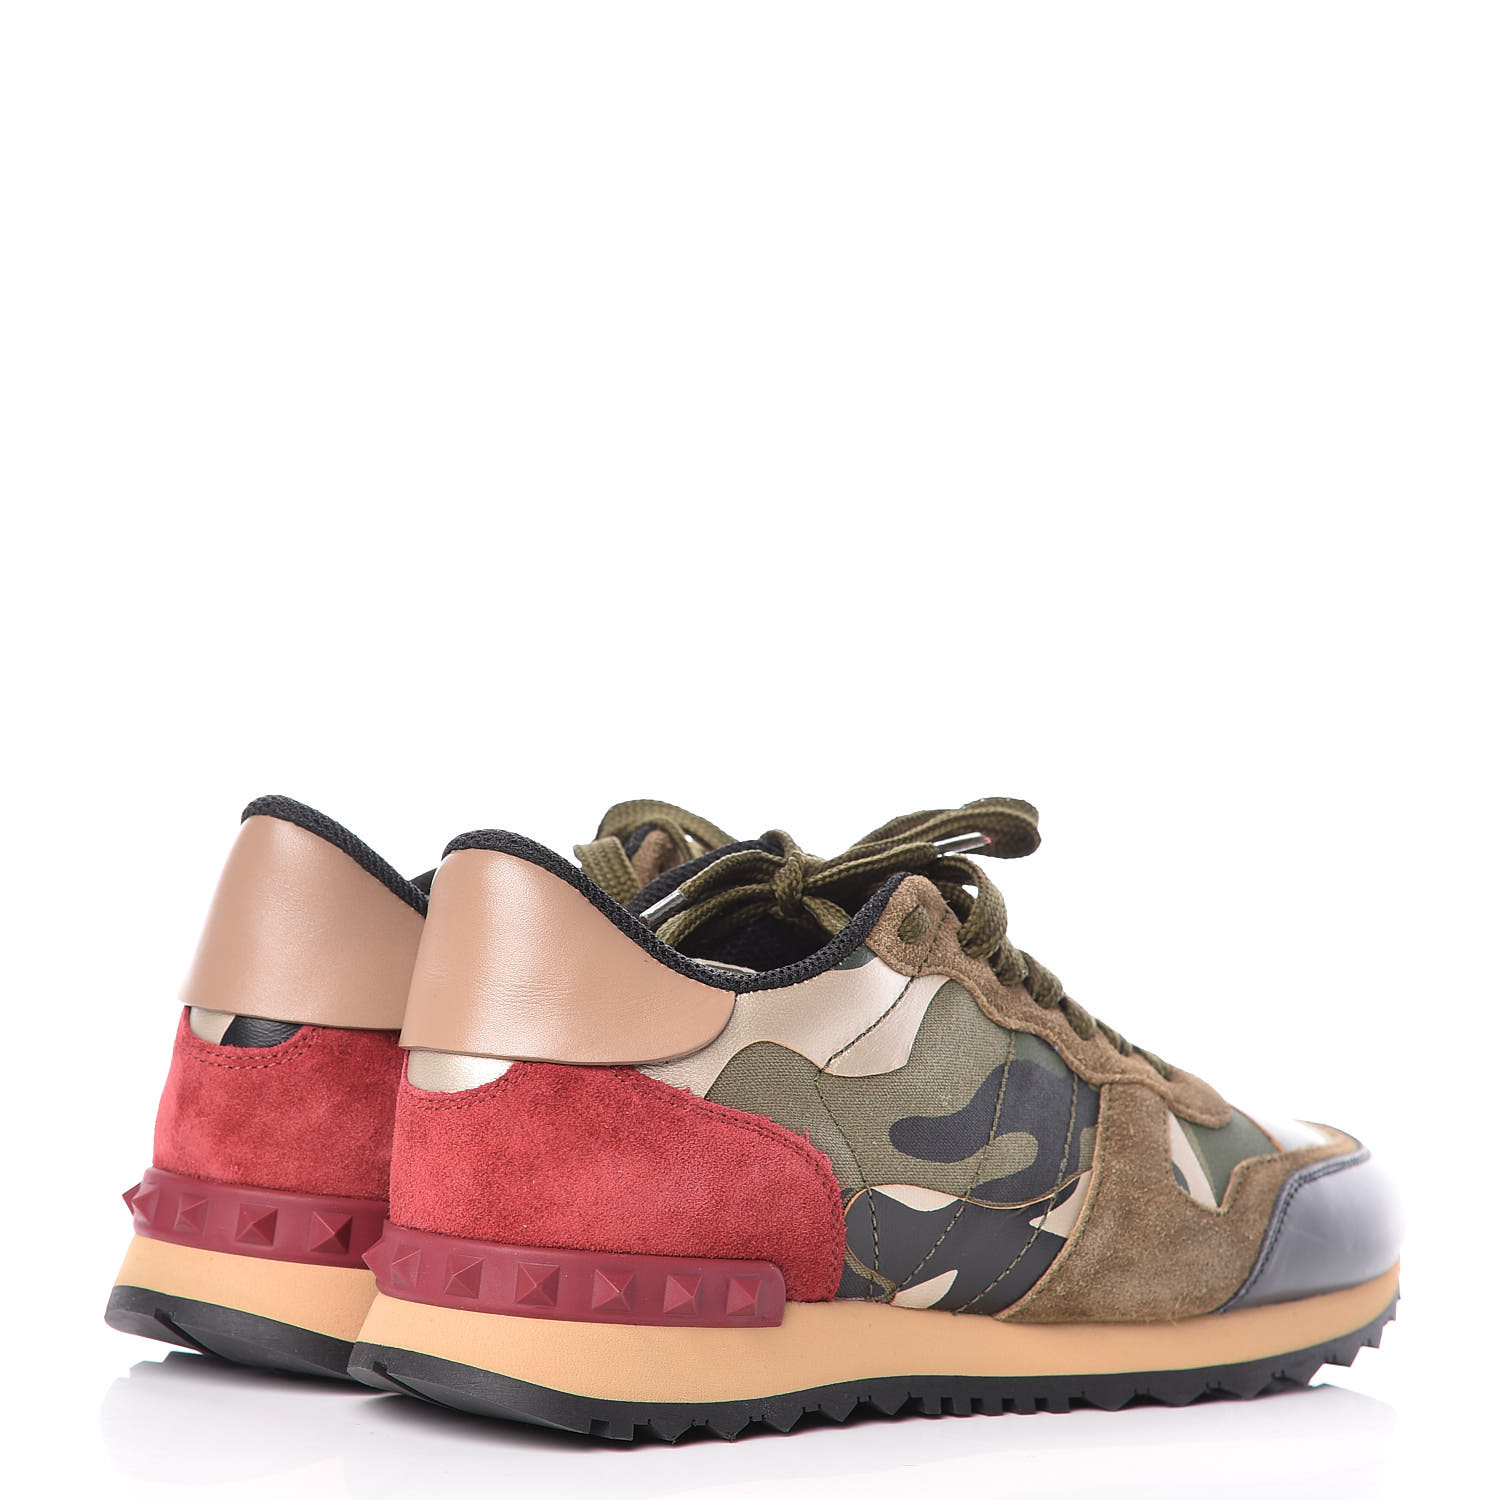 VALENTINO Nappa Suede Camouflage Womens Rockrunner Sneakers 36.5 